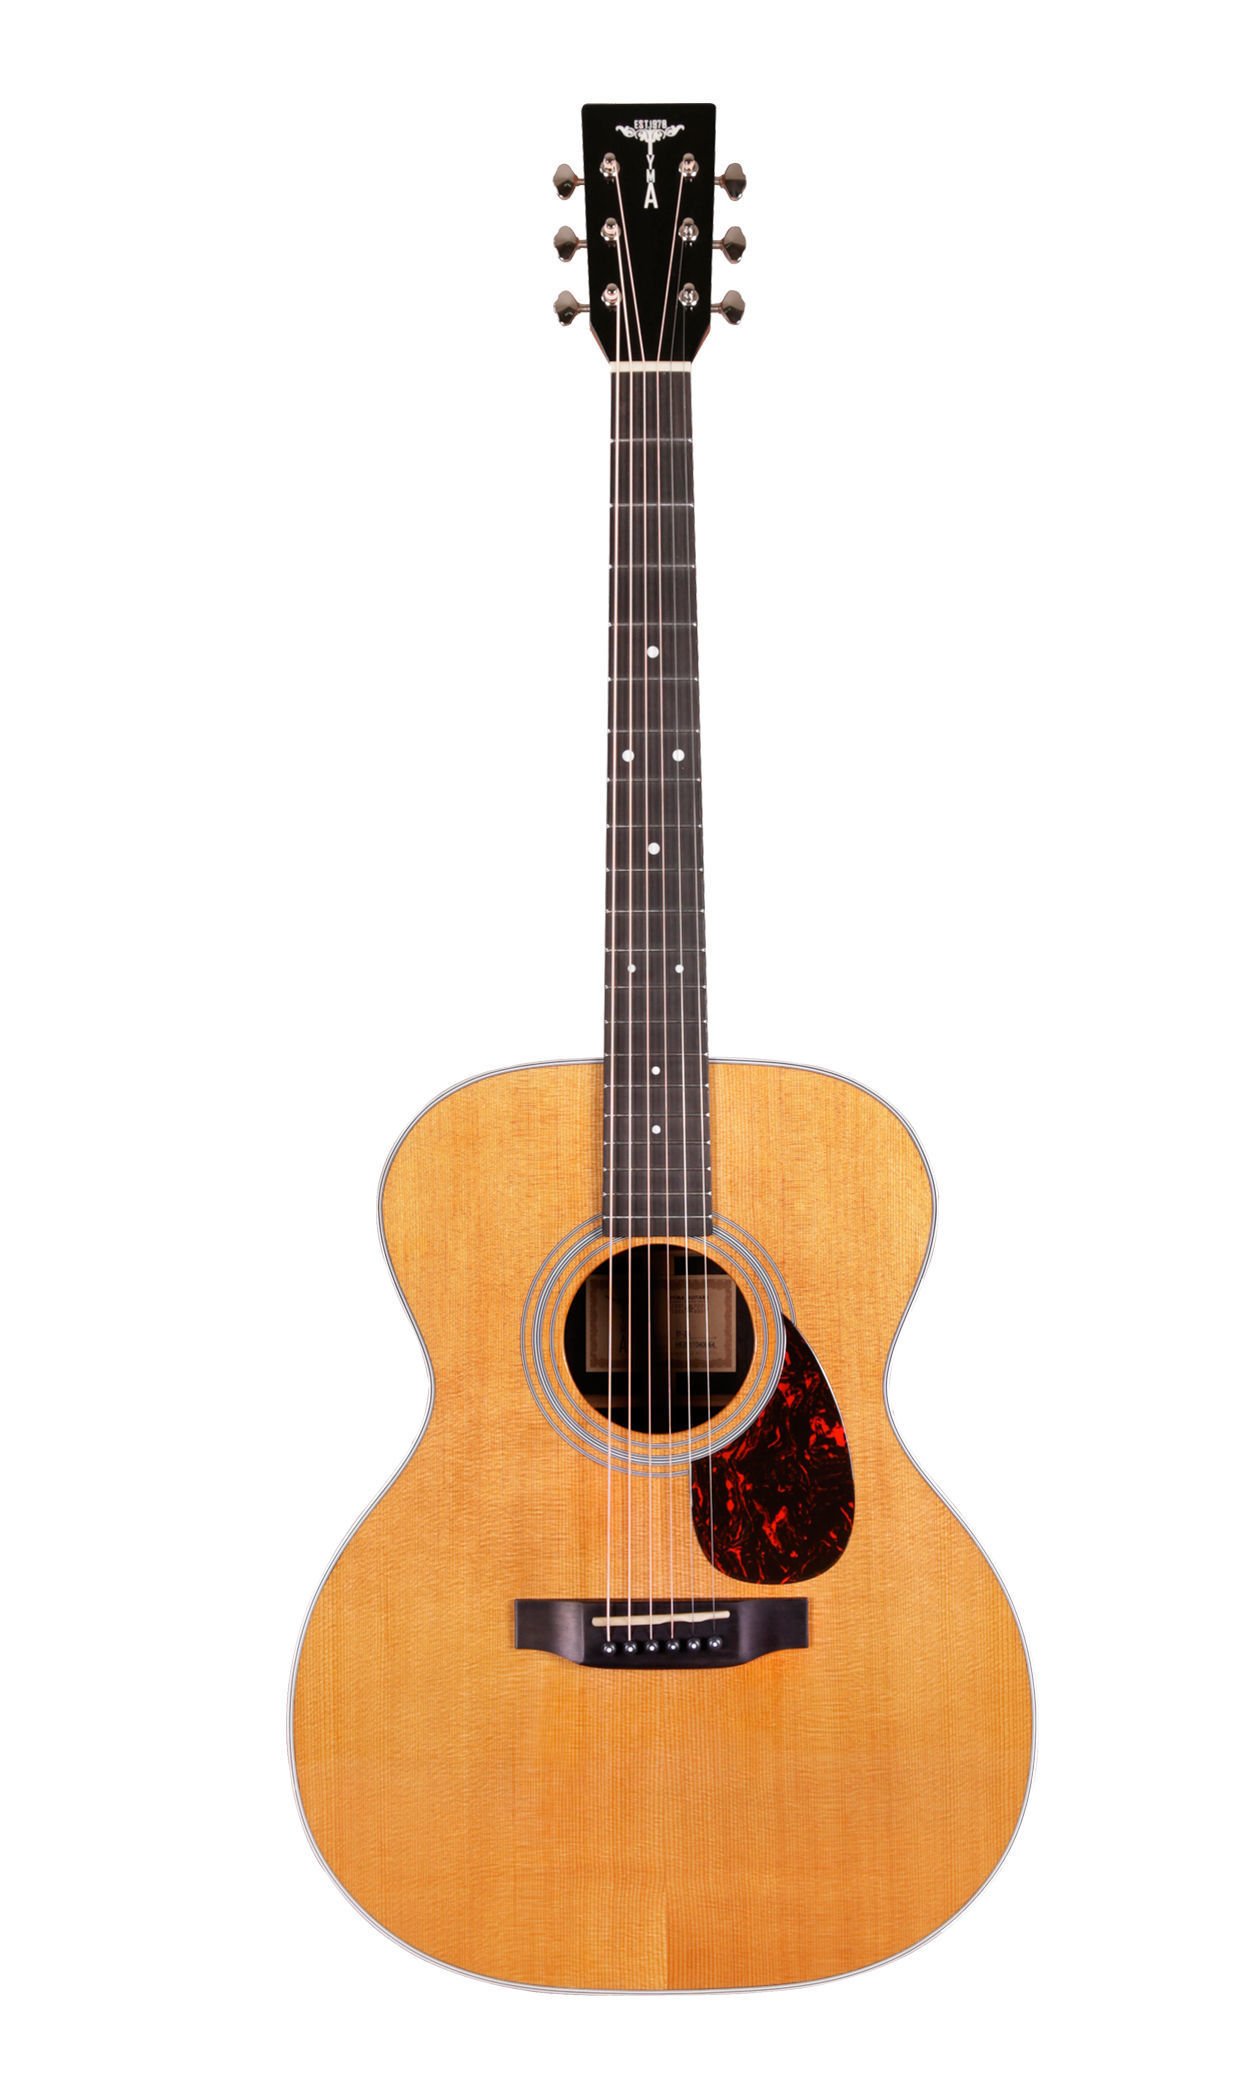 Tyma TF-28 OM All Solid Acoustic Guitar with hardshell case